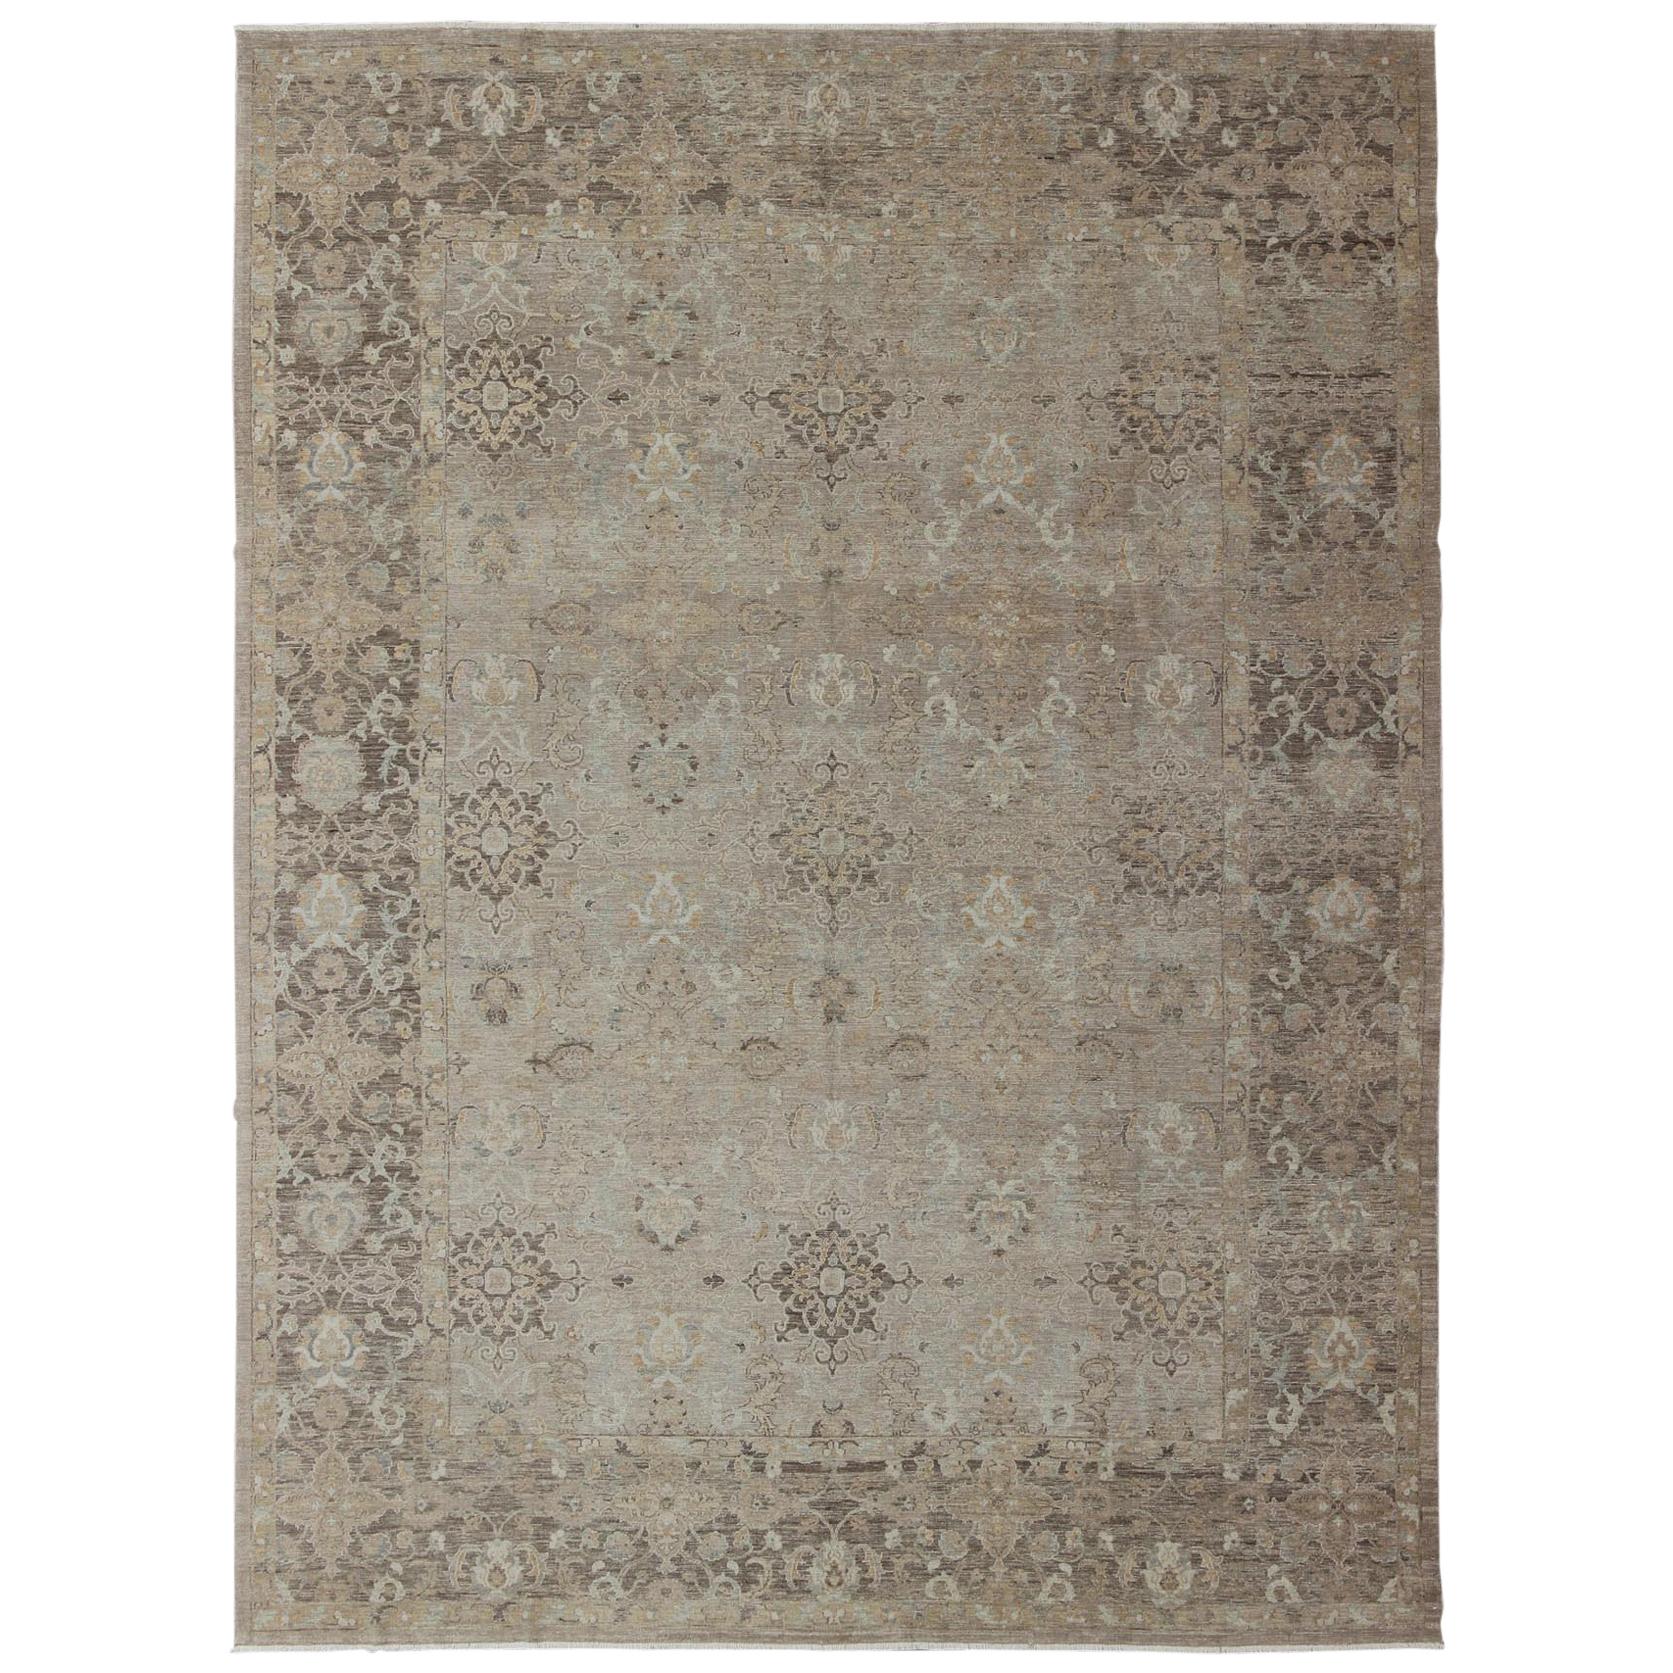 Turkish Sivas Fine Weave Rug in Taupe, Gray, Ivory and Brown and Cream Colors